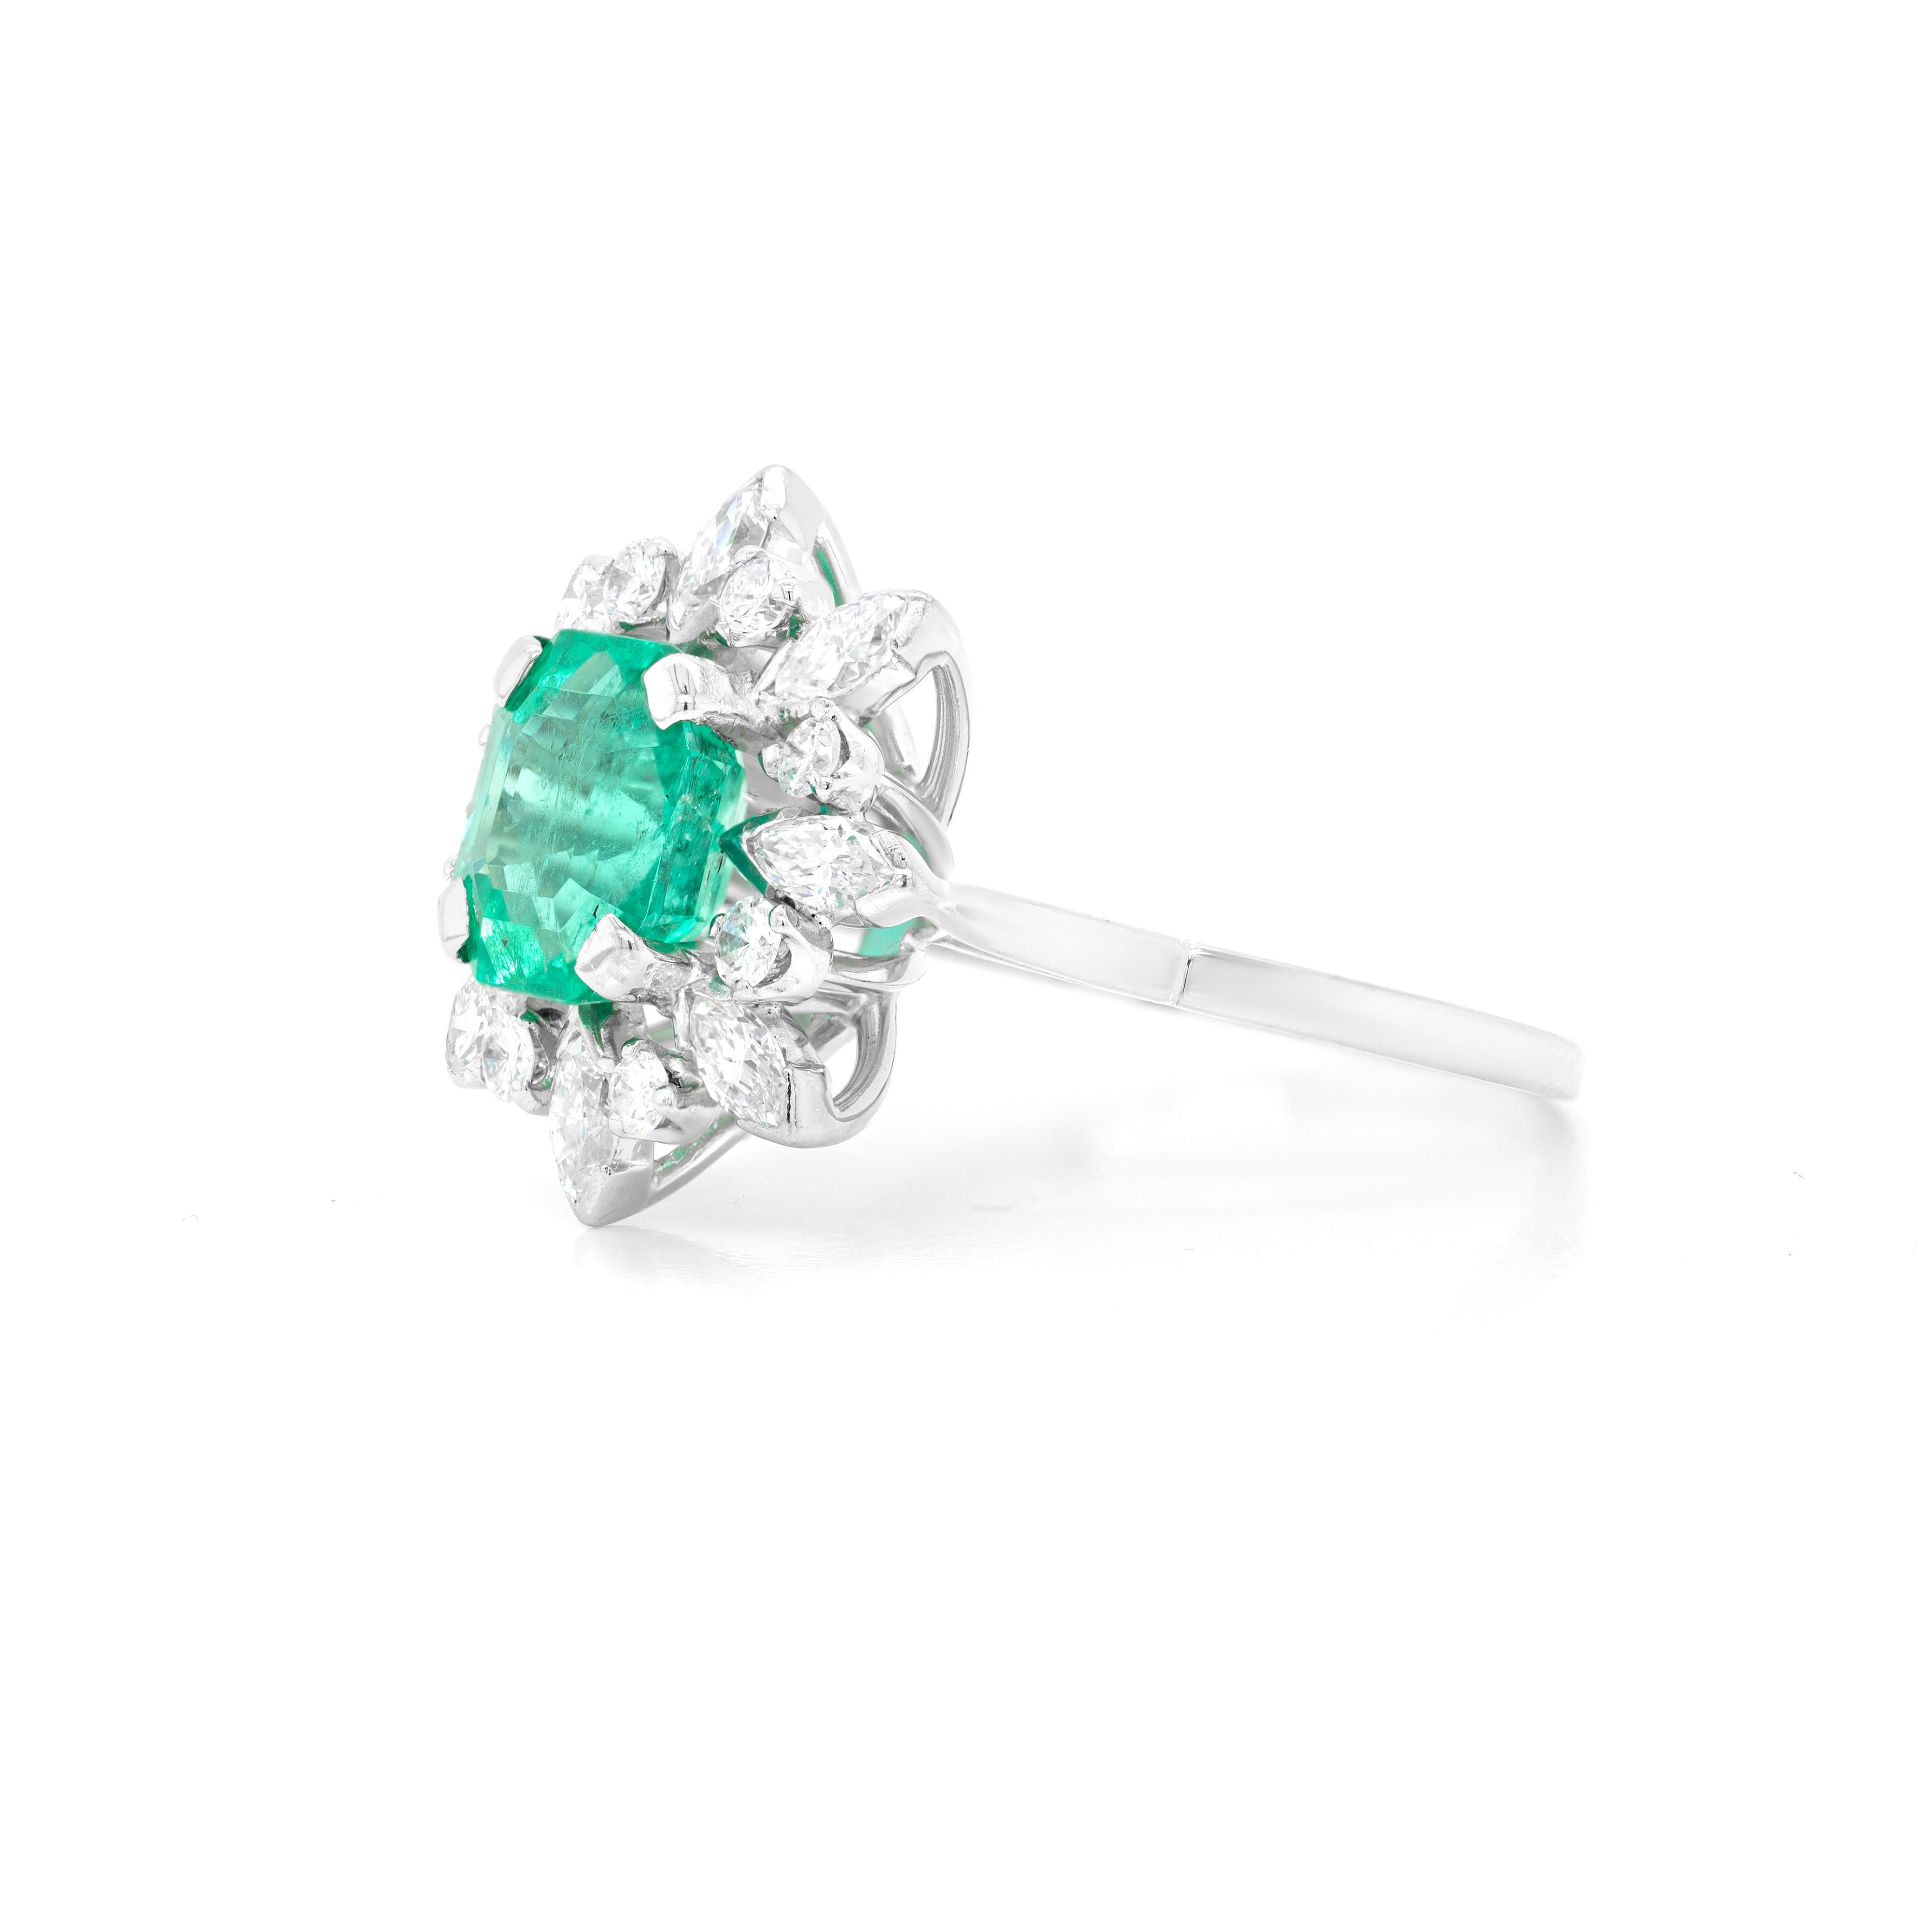 This vintage cluster engagement ring features a vibrant emerald in the centre weighing 2.27 carats mounted in a four claw, open back setting. The gemstone is perfectly surrounded by alternating marquise and brilliant cut diamonds giving a wonderful